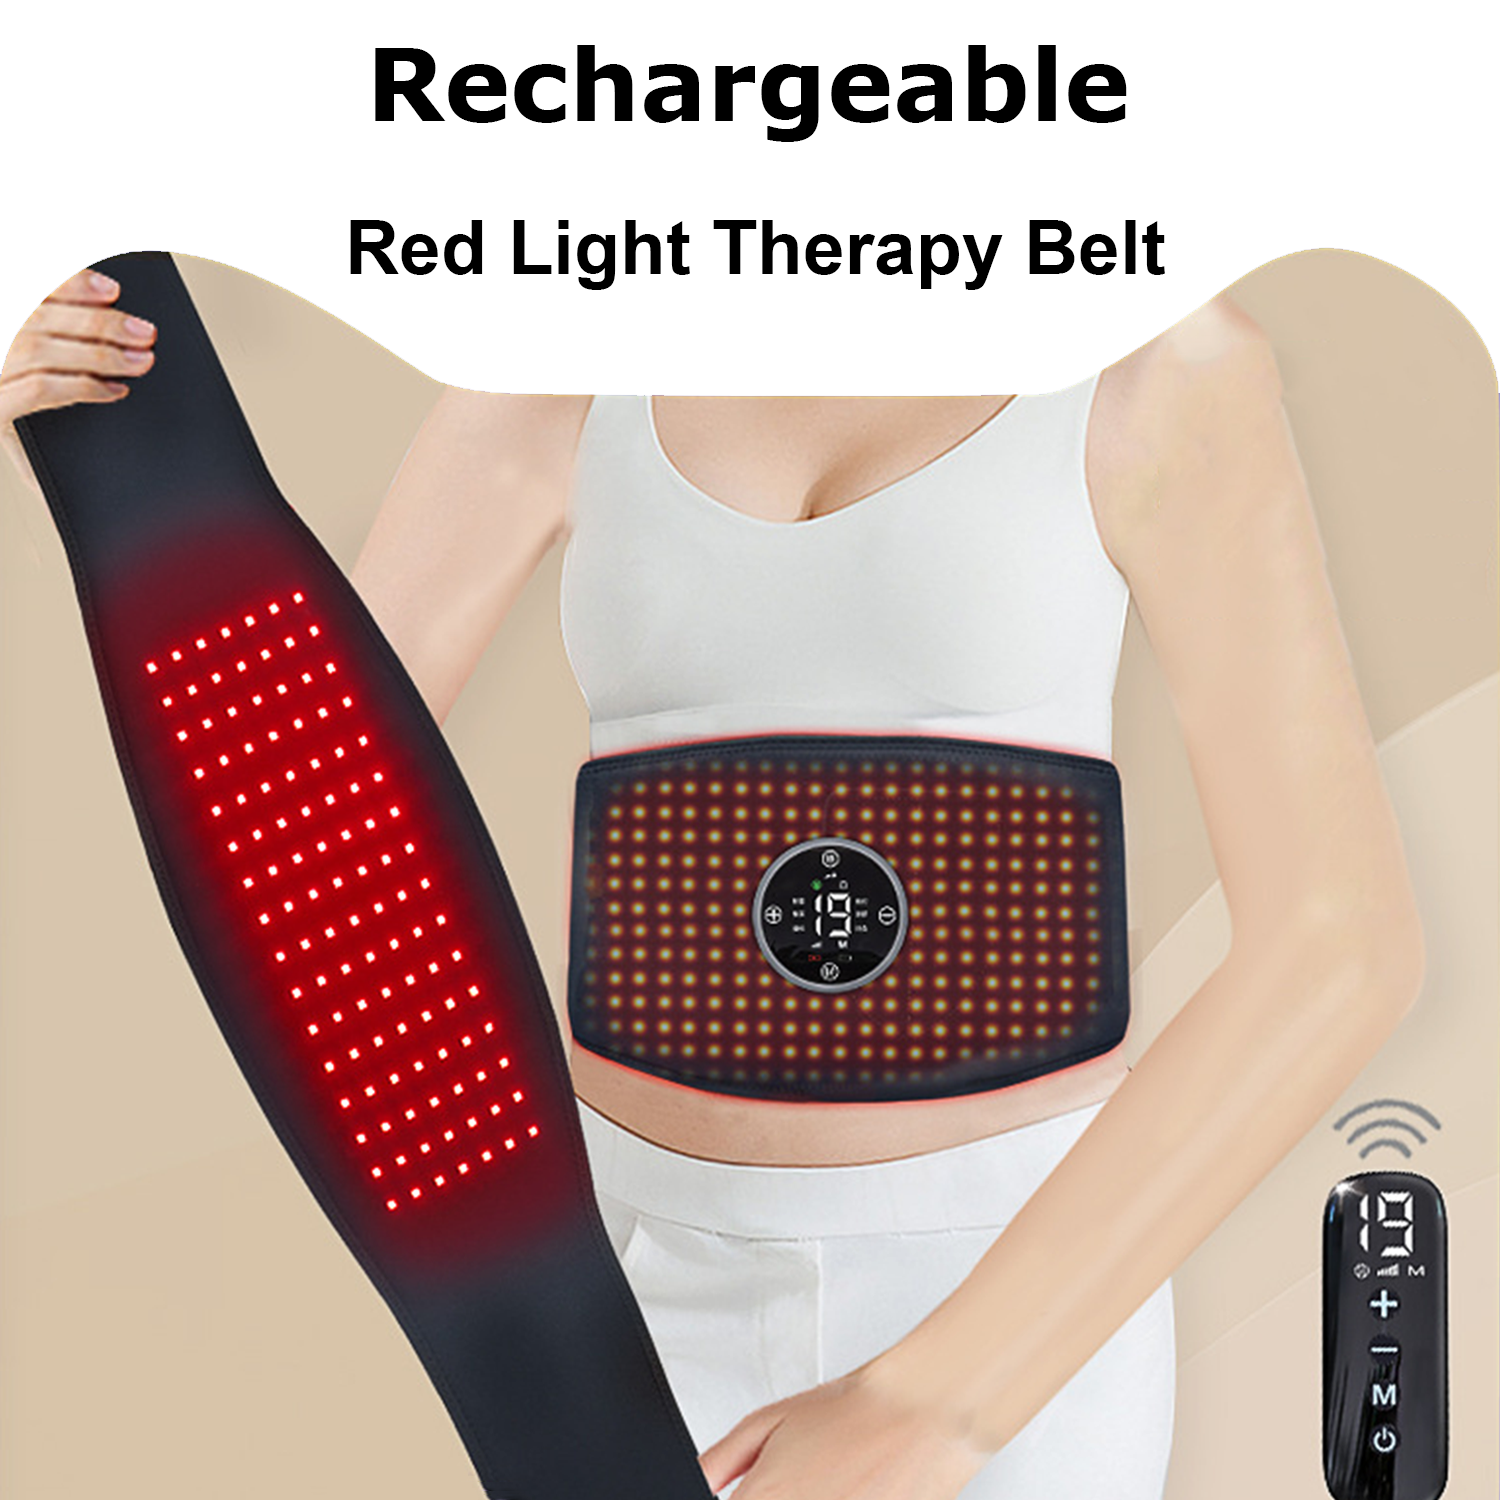 cordless red light therapy belt